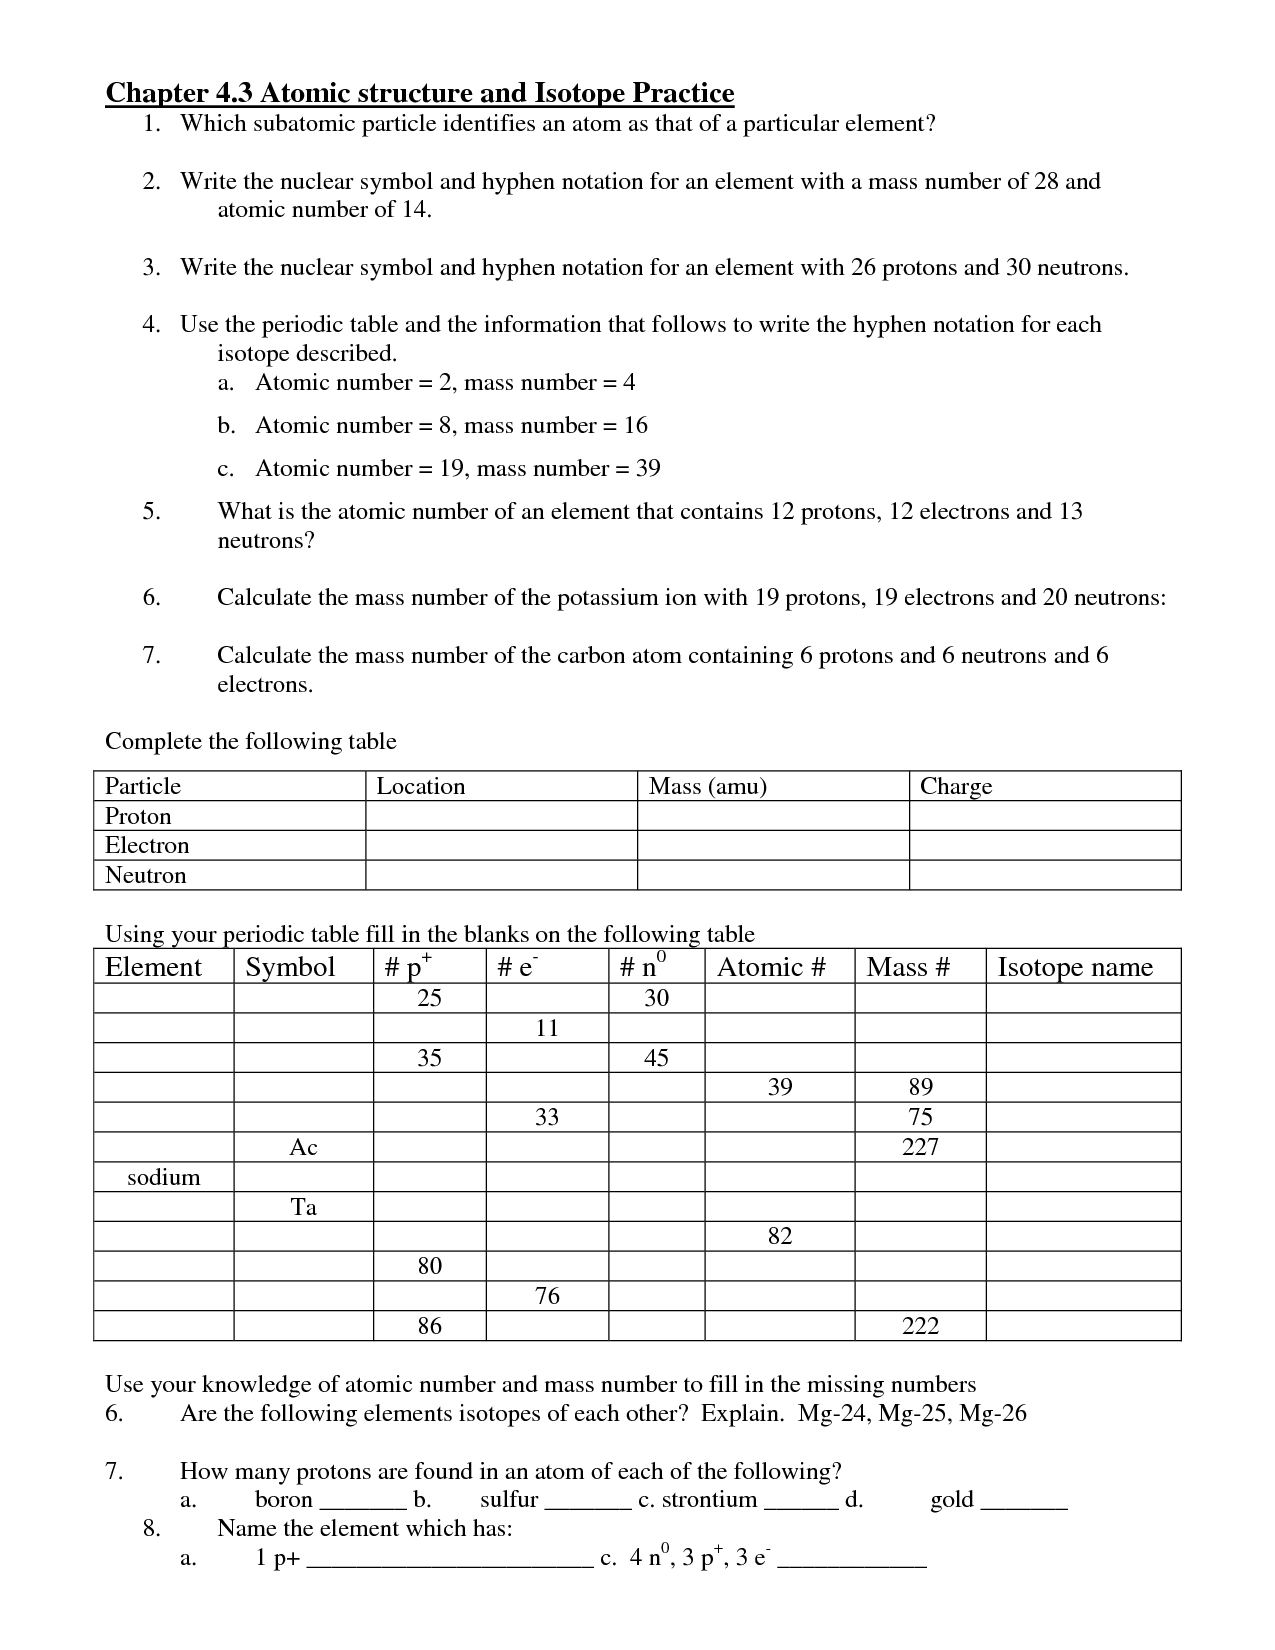 Atomic Structure Worksheet Answers Key